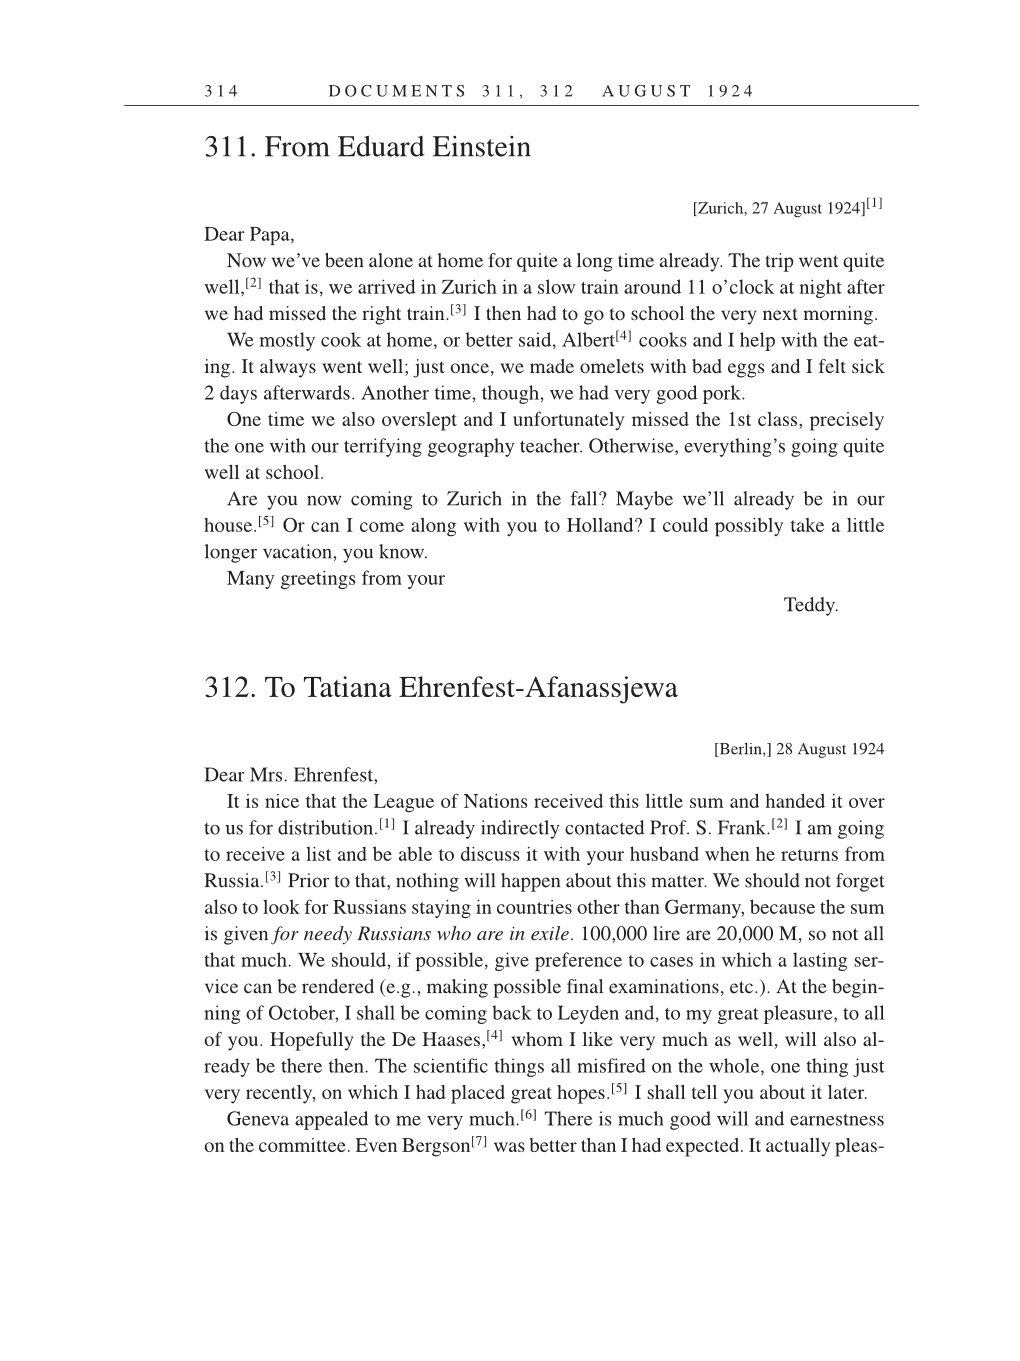 Volume 14: The Berlin Years: Writings & Correspondence, April 1923-May 1925 (English Translation Supplement) page 314